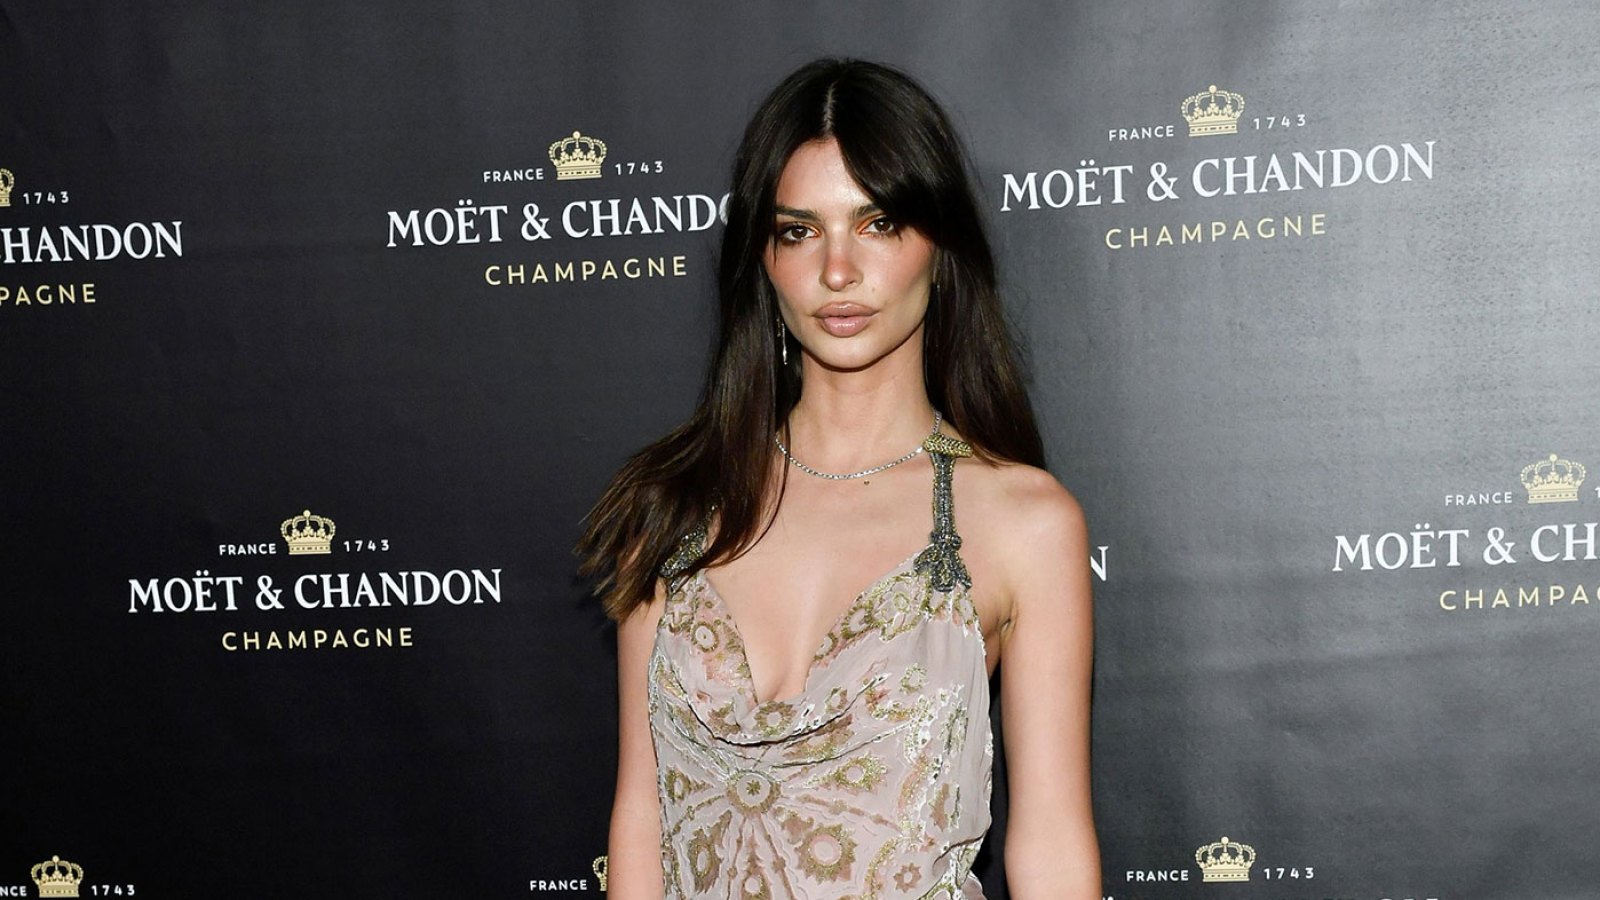 Emily Ratajkowski’s Hairstylist Reveals She Carries Clip-In Bangs to ‘Transform’ the Model’s Hair